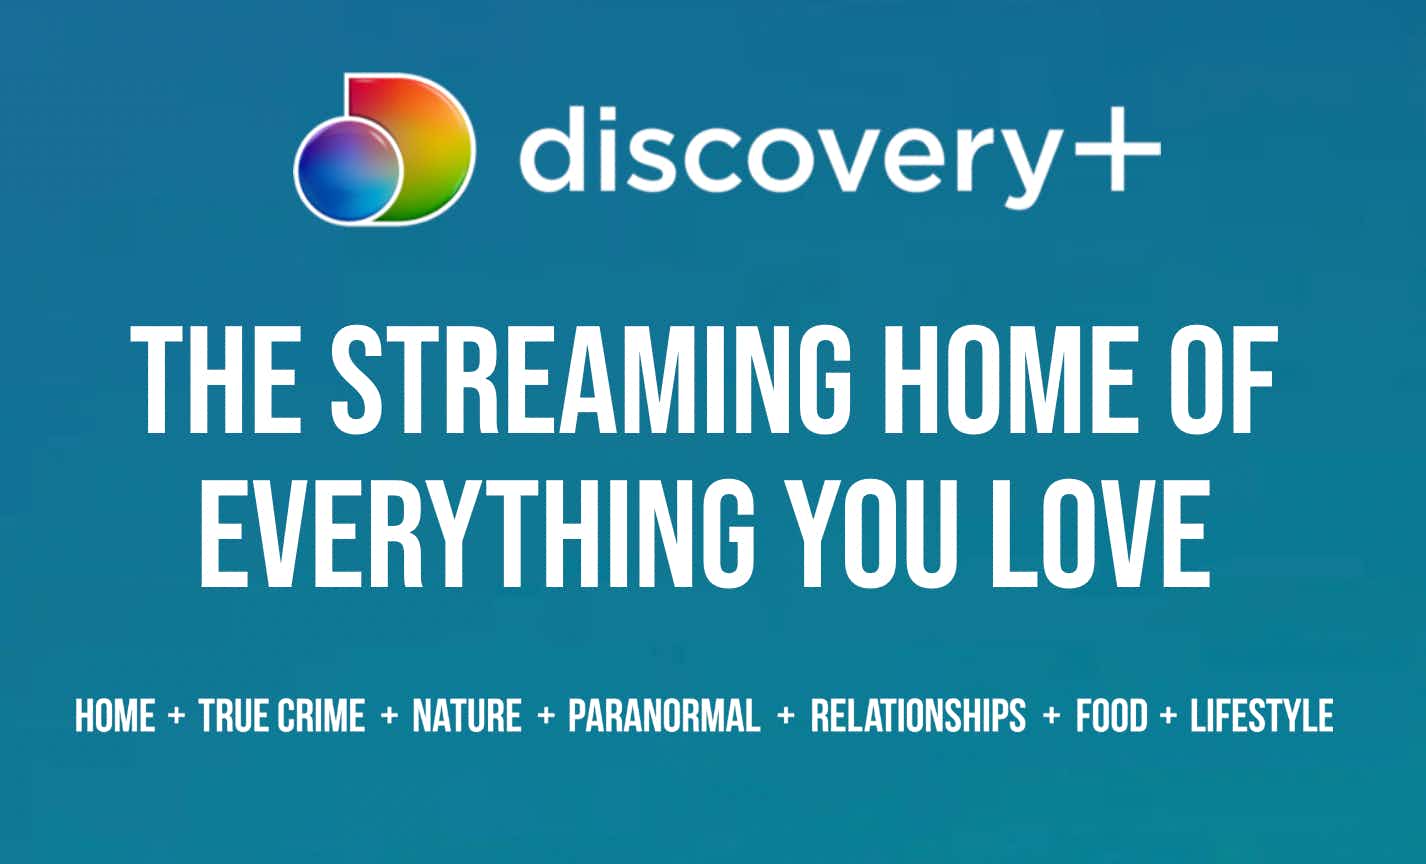 A screenshot from the Discovery + website that reads, "Discovery plus, the streaming home of everything you love" with a list of genres.